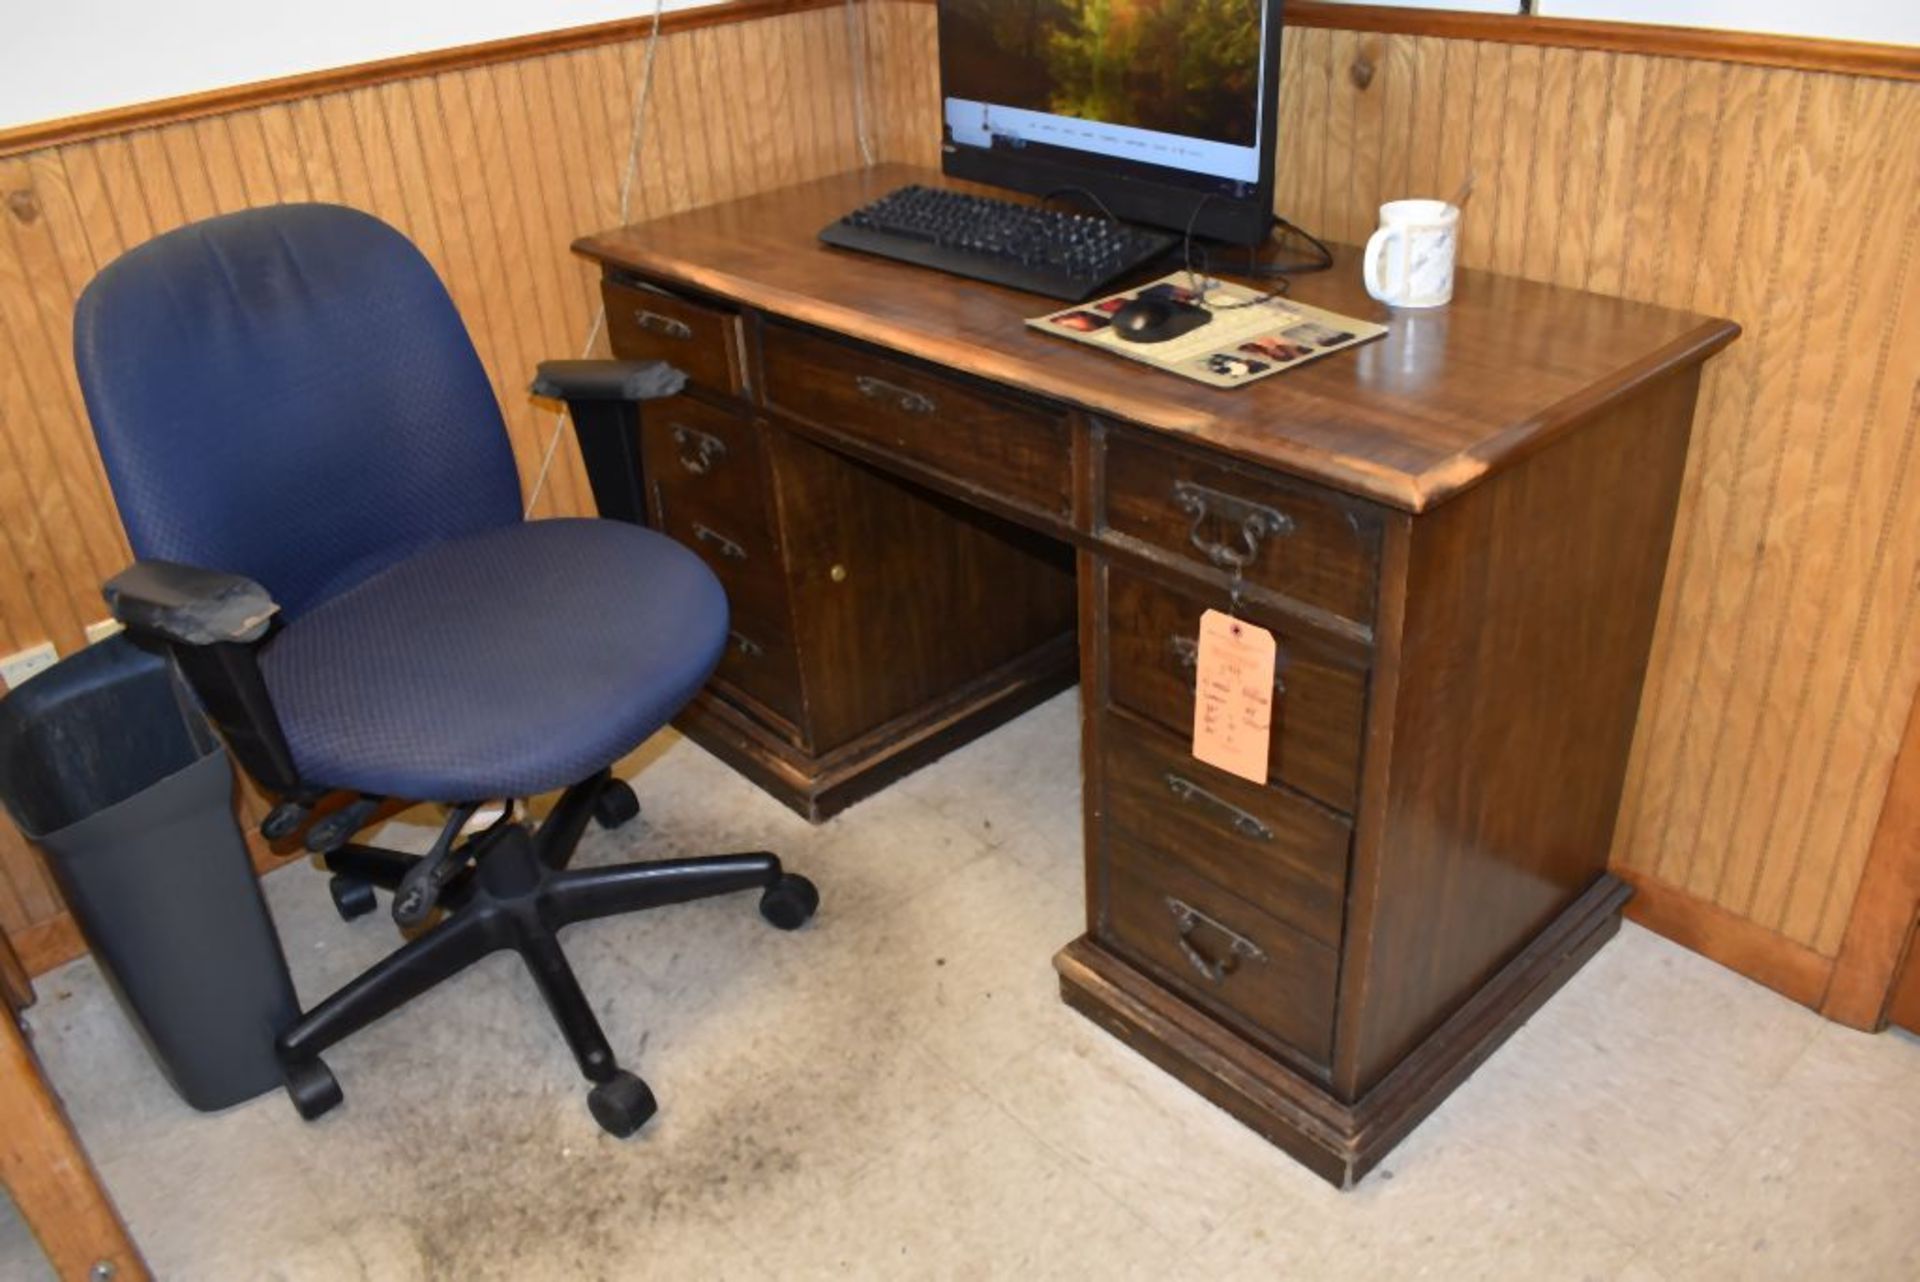 WOOD OFFICE DESK WITH CHAIR, 59"L x 22"D x 30"H